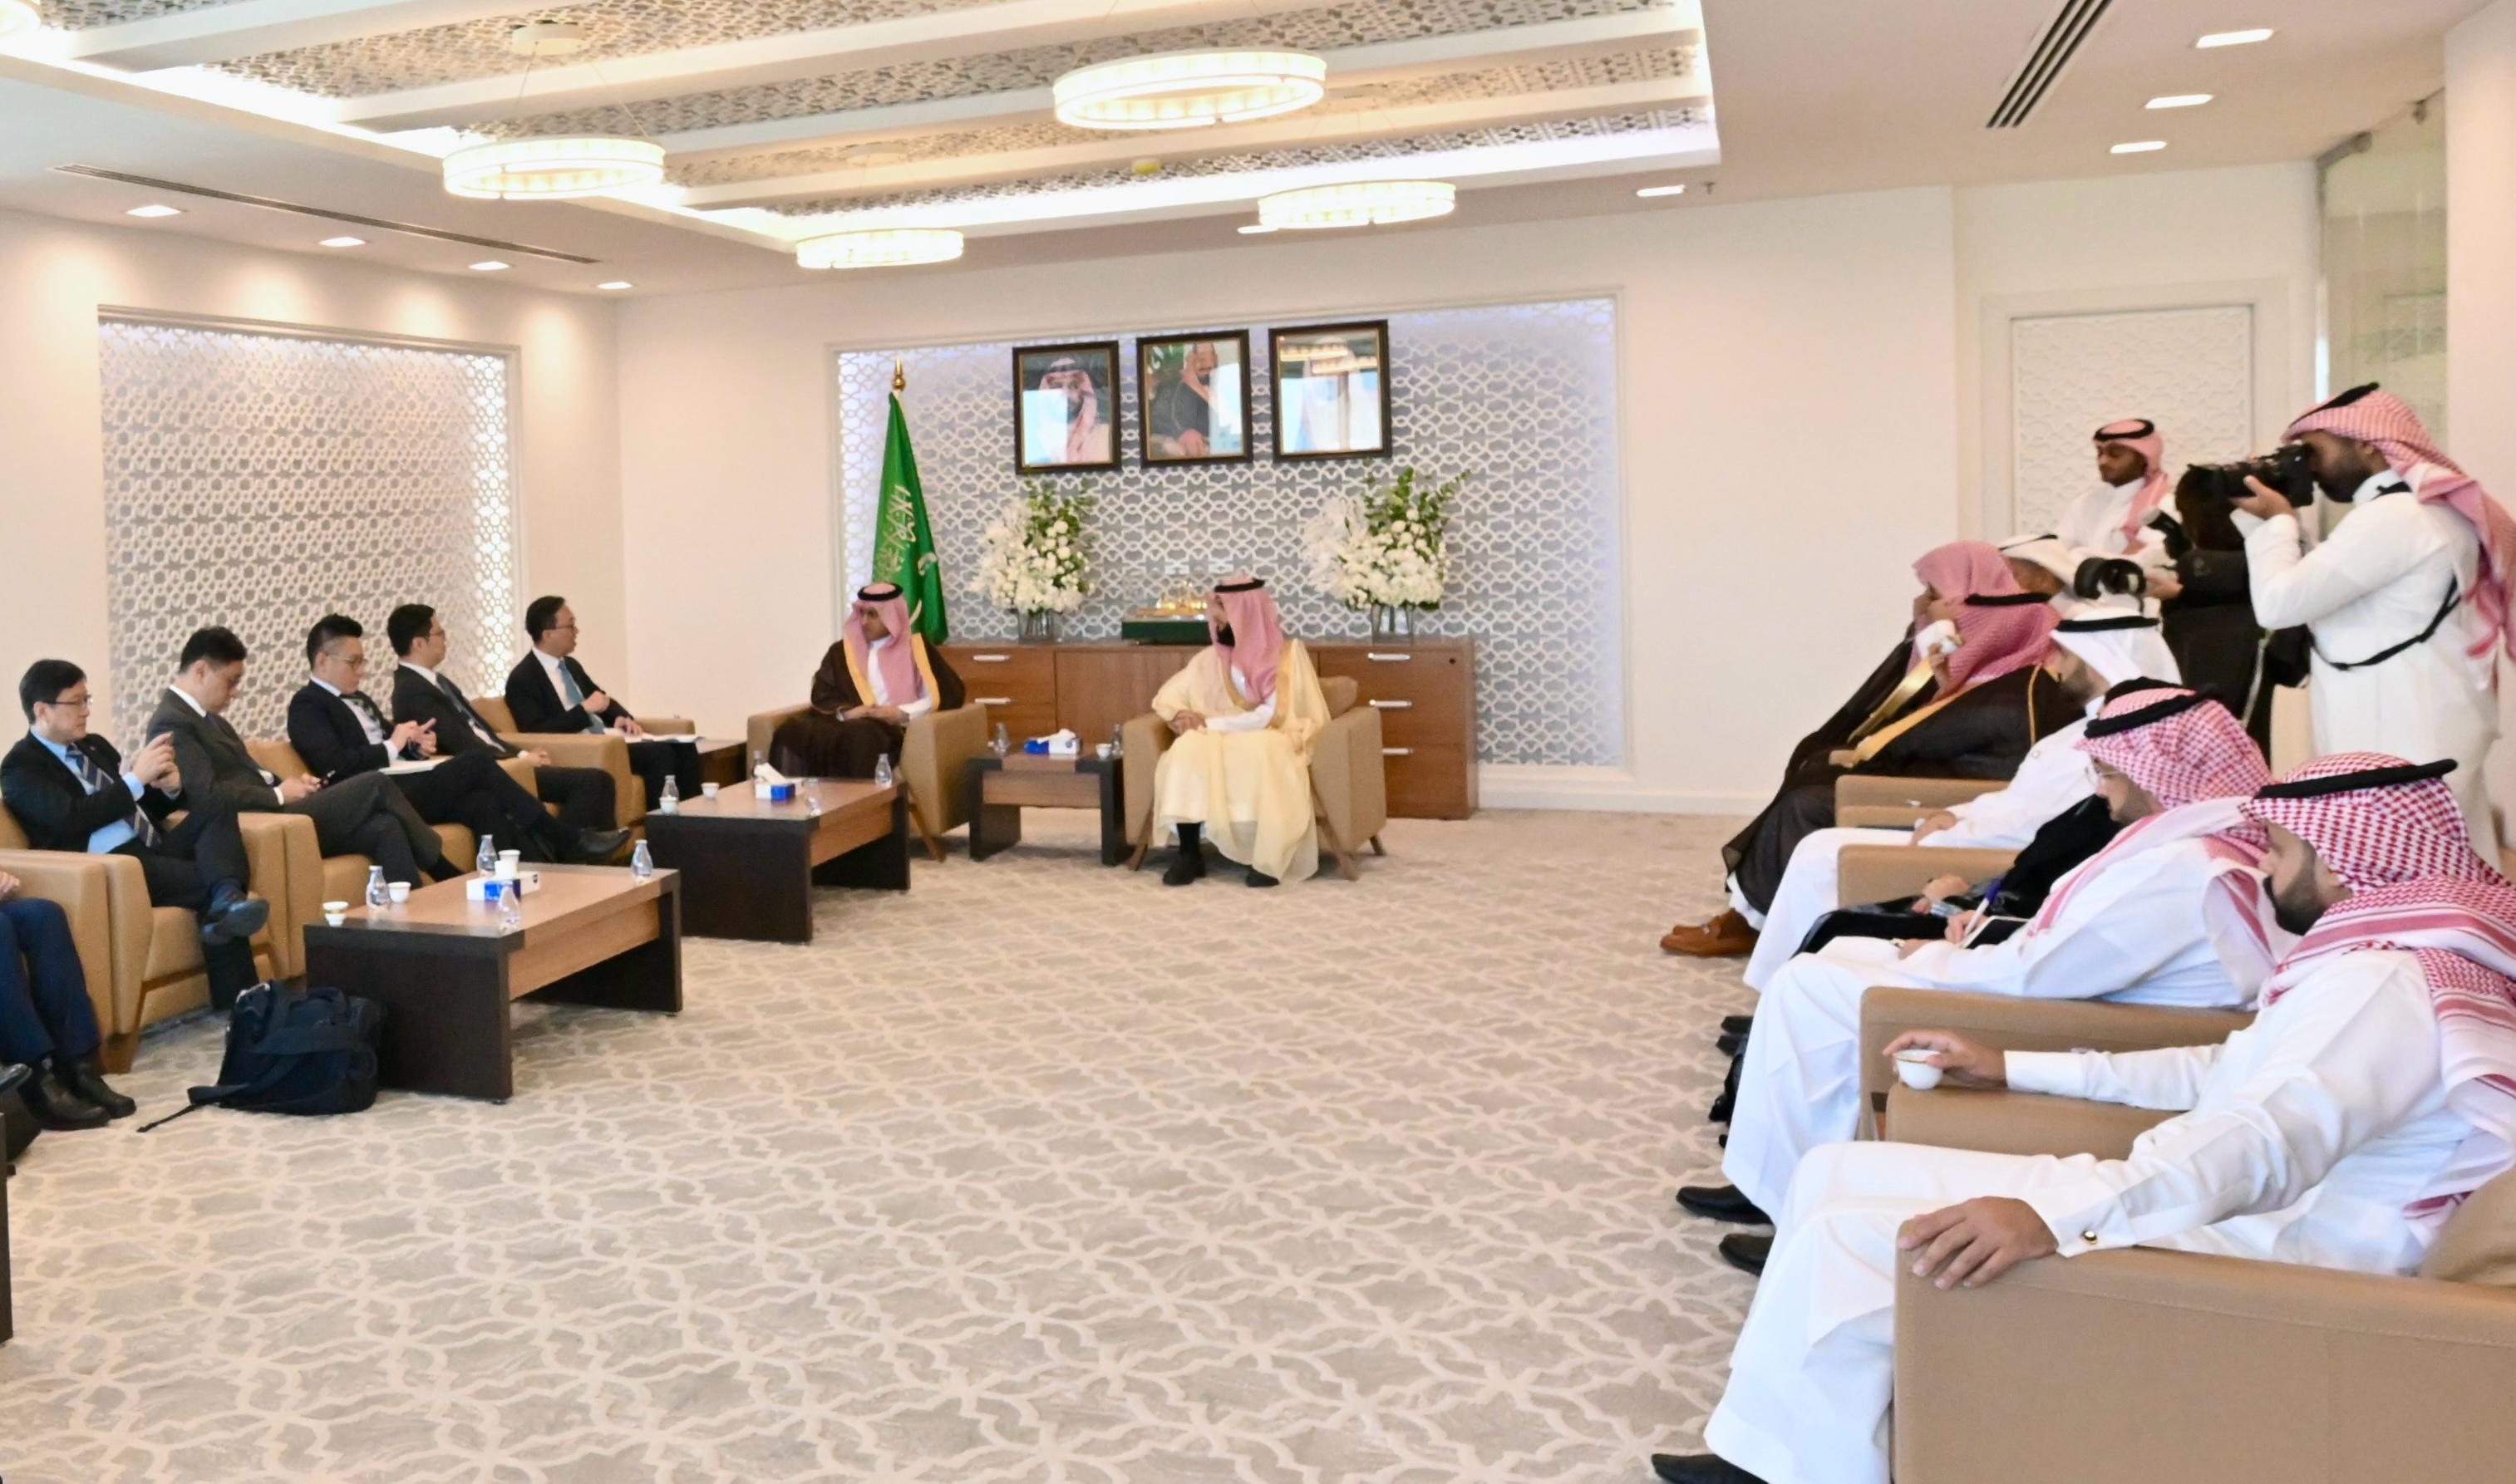 The Secretary for Justice, Mr Paul Lam, SC, continued his visit to Riyadh, Saudi Arabia, today (May 20, Riyadh time) with his about 30-person delegation, comprising representatives from the Law Society of Hong Kong, the Hong Kong Bar Association, the Hong Kong Exchanges and Clearing Limited, Invest Hong Kong and related sectors. Photo shows Mr Lam (fifth left) and his delegation meeting with the Vice-Minister of Justice of the Kingdom of Saudi Arabia, Dr Najem bin Abdullah al-Zaid (sixth left).
